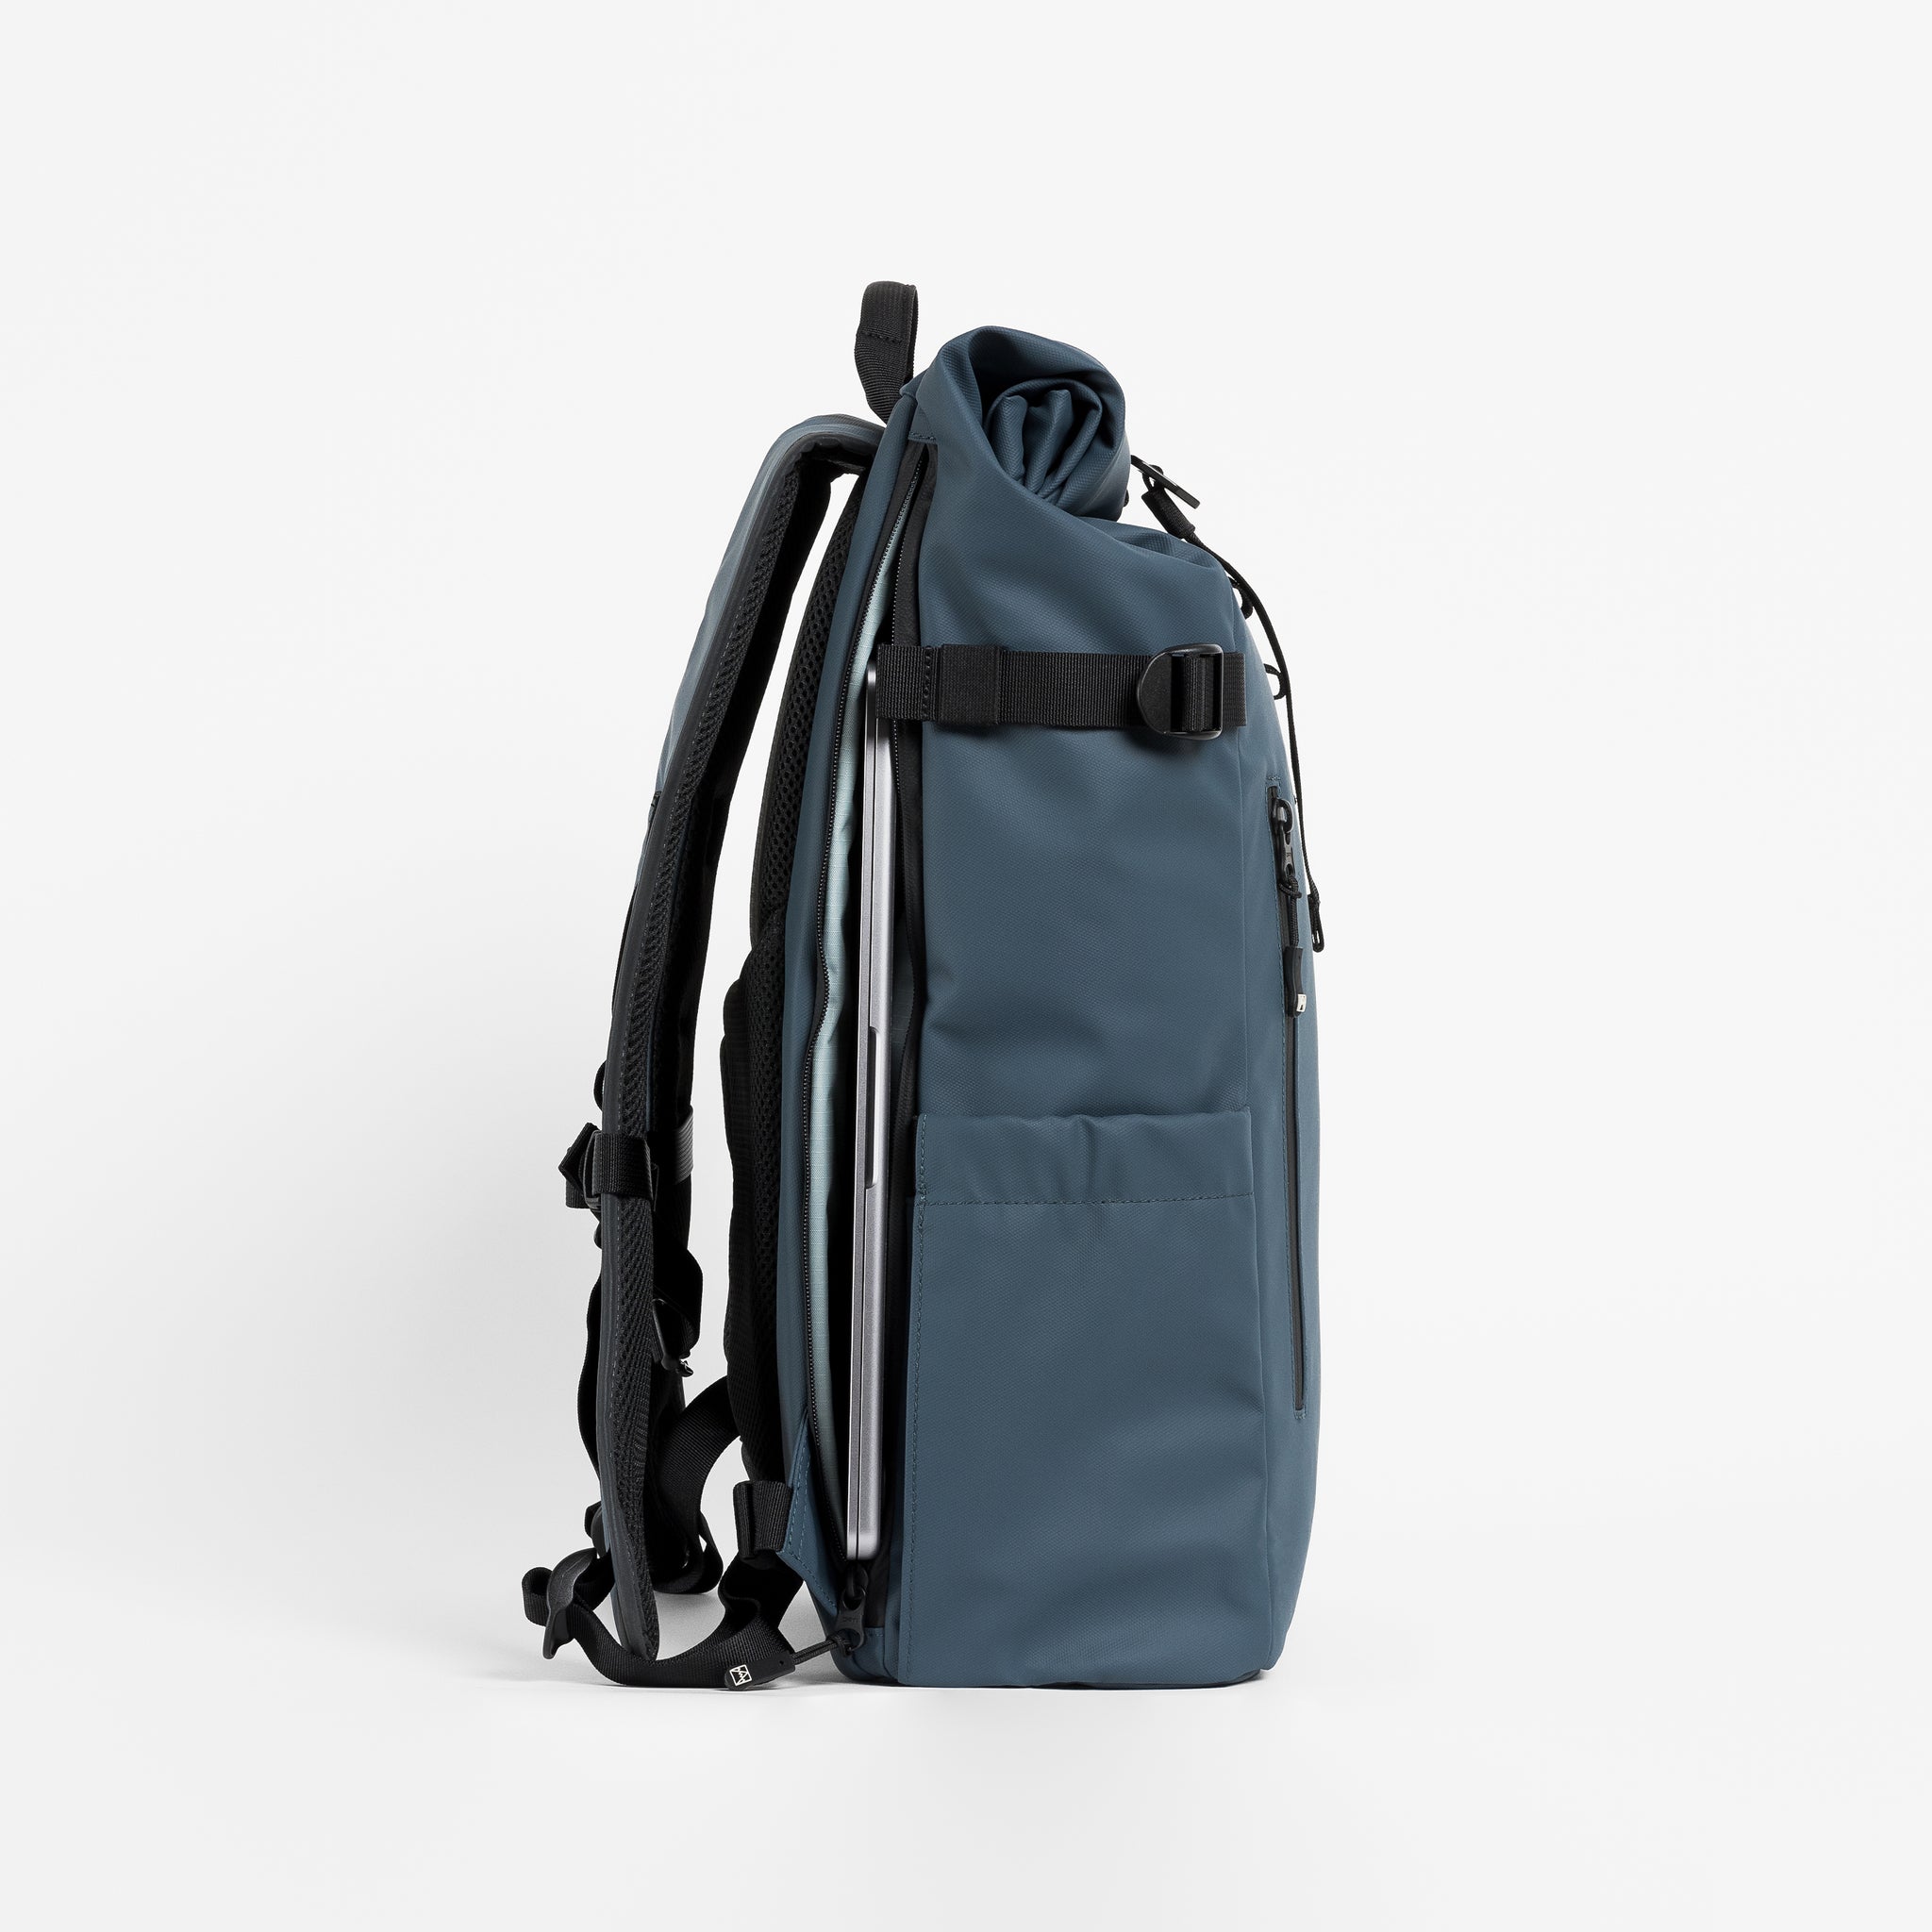 Side view of The Roll Top 20L backpack in Tasmin Blue with laptop compartment